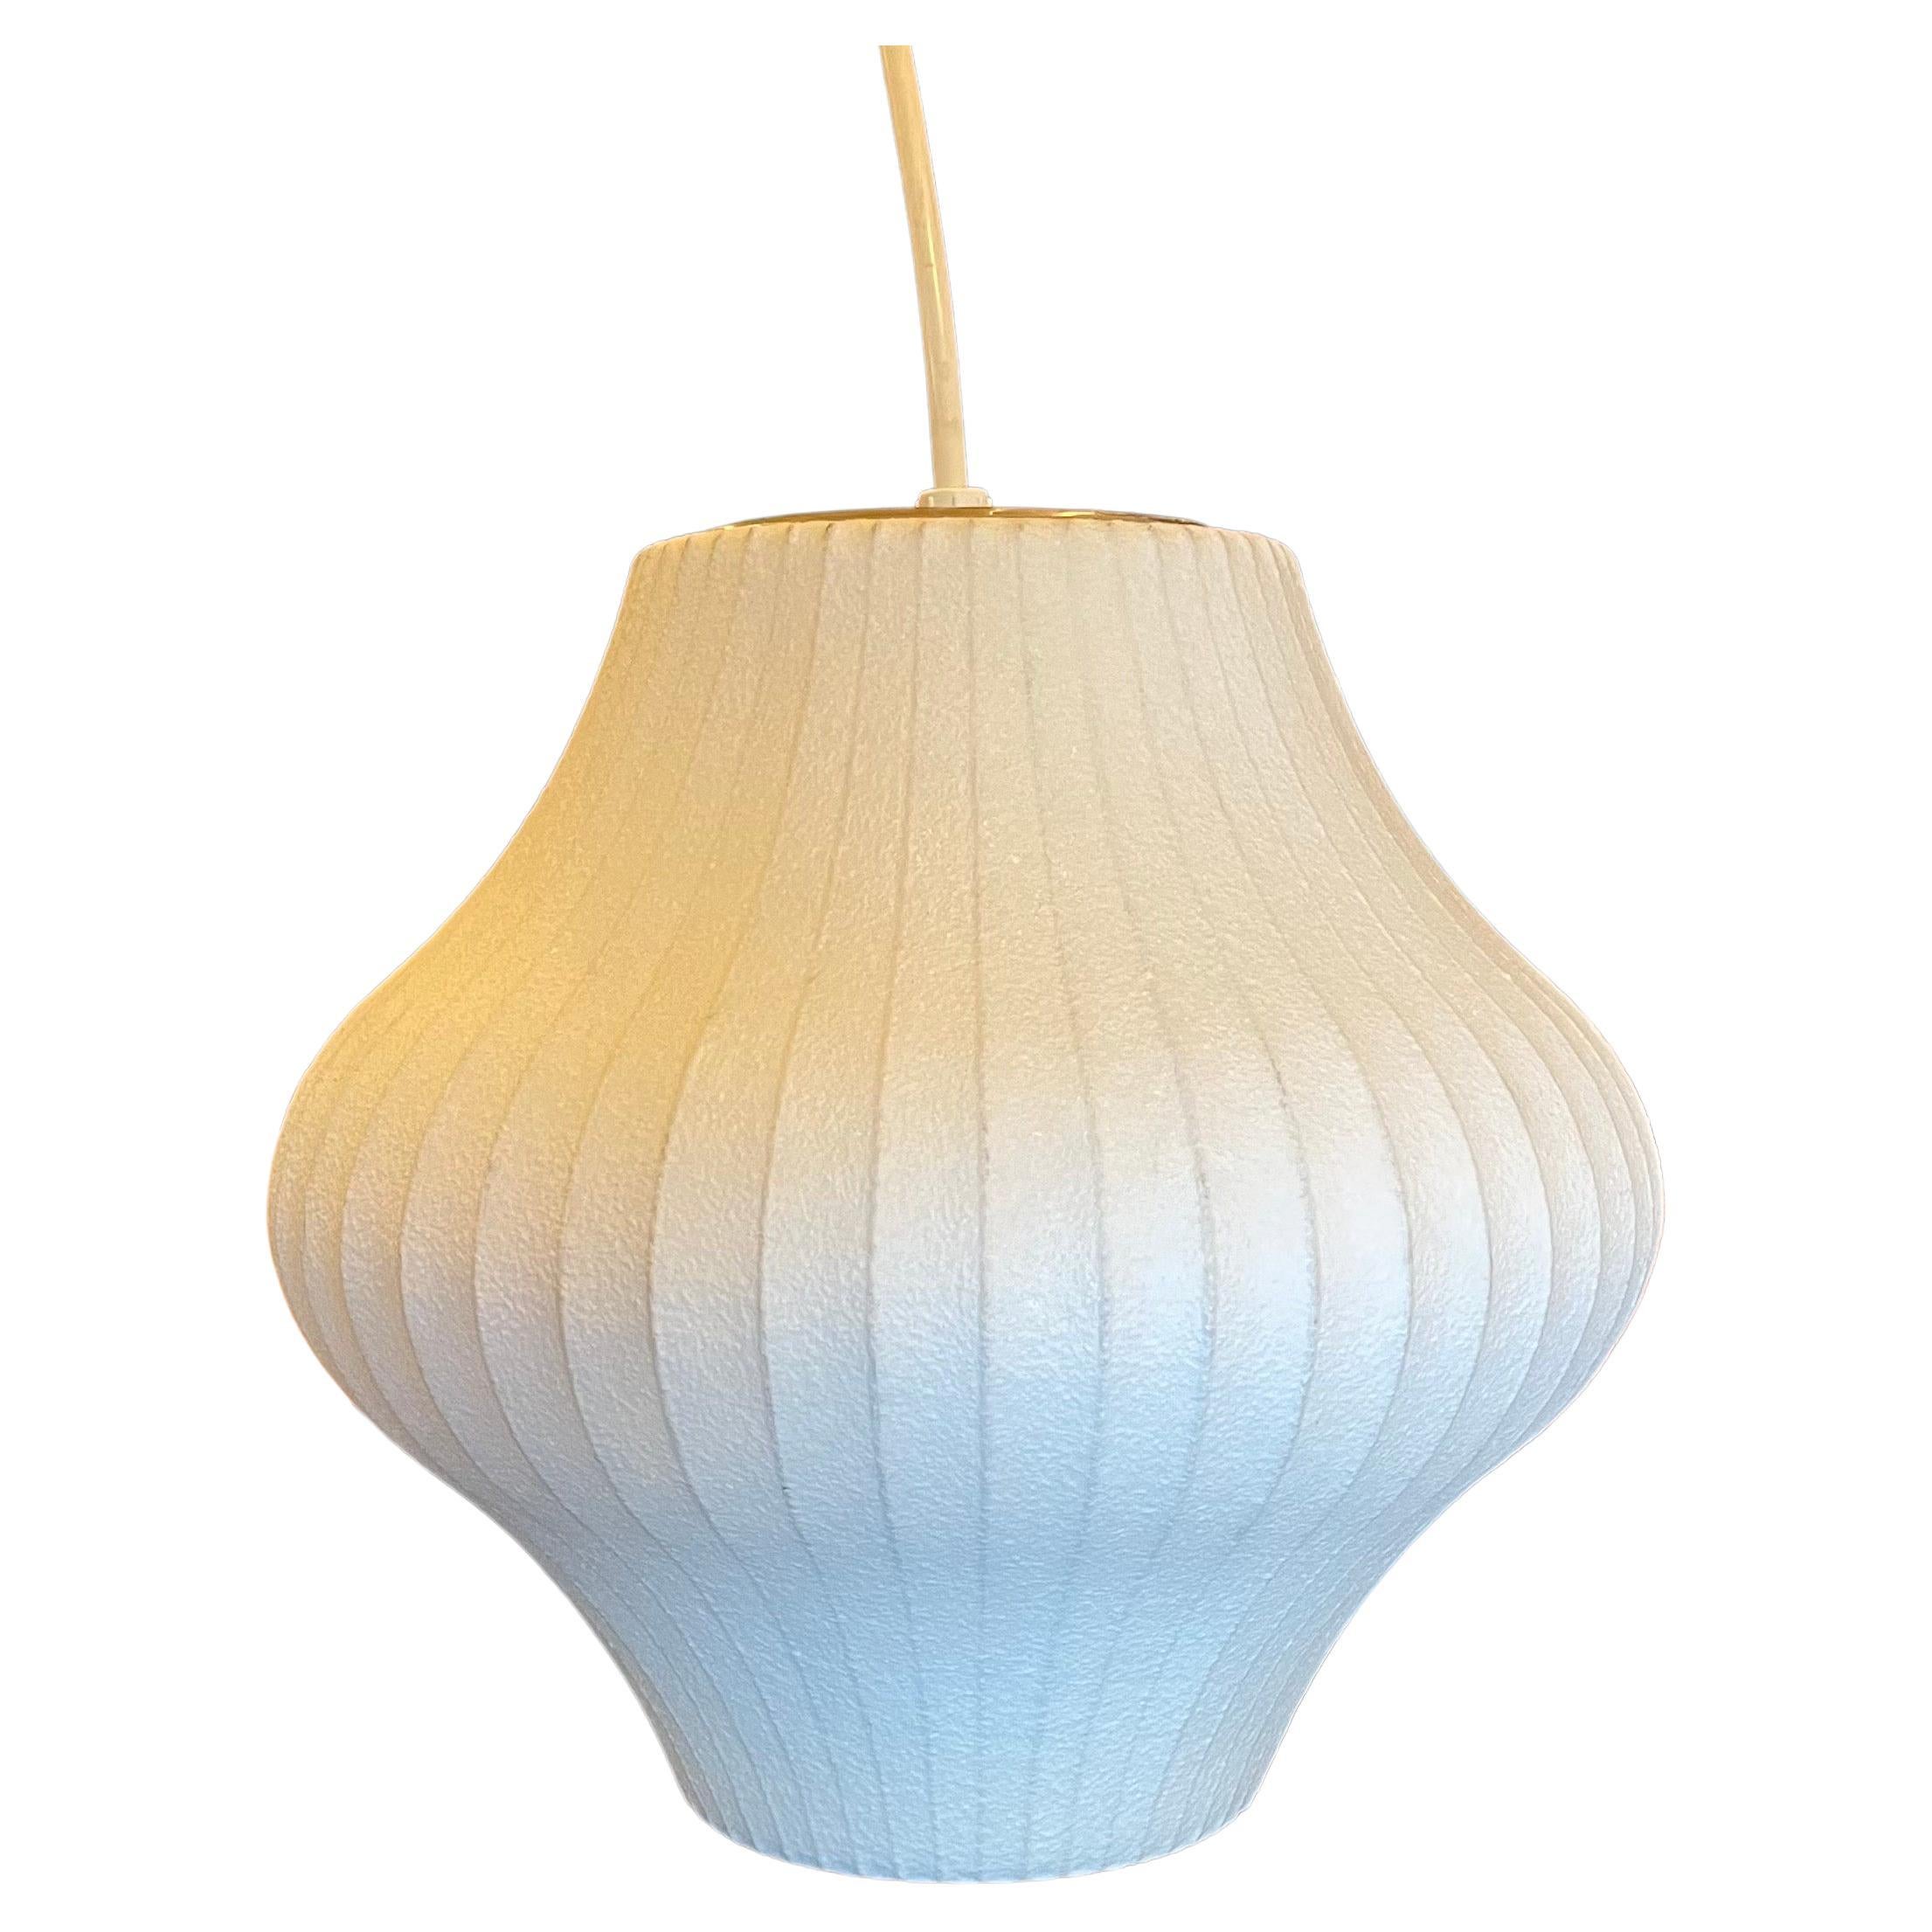 A classic pendant bubble lamp light used by Modernica in perfect working condition 2 available.